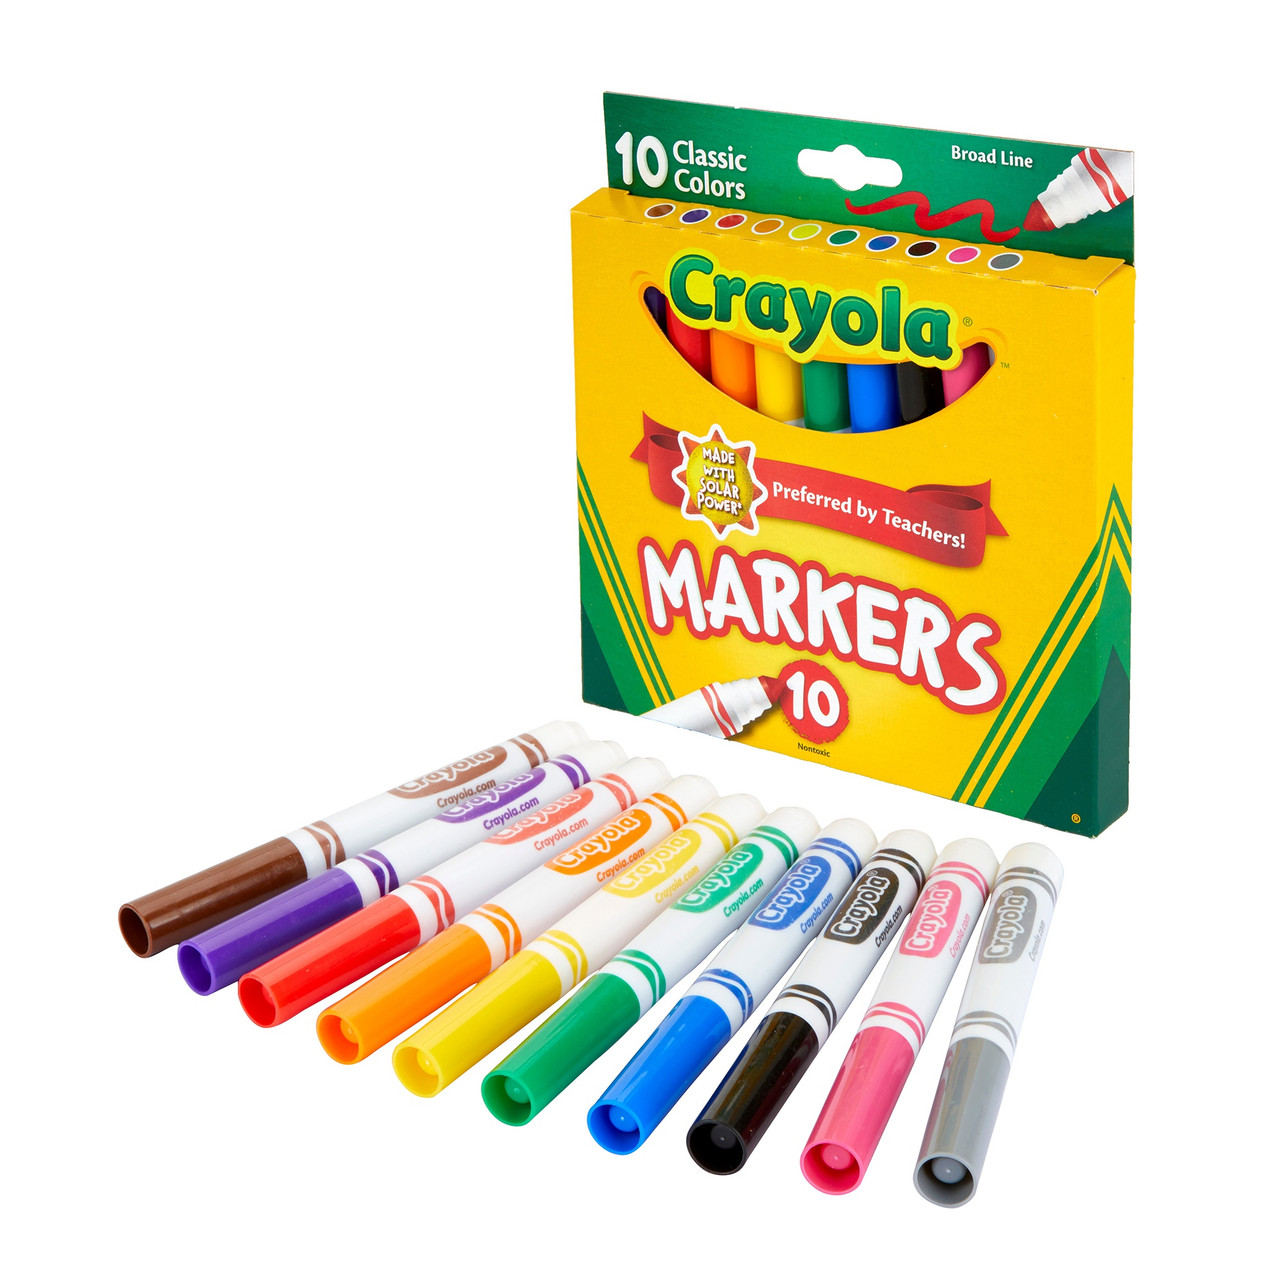 Crayola Fine Line Markers-Classic Colors 8/Pkg 58-7709 - GettyCrafts